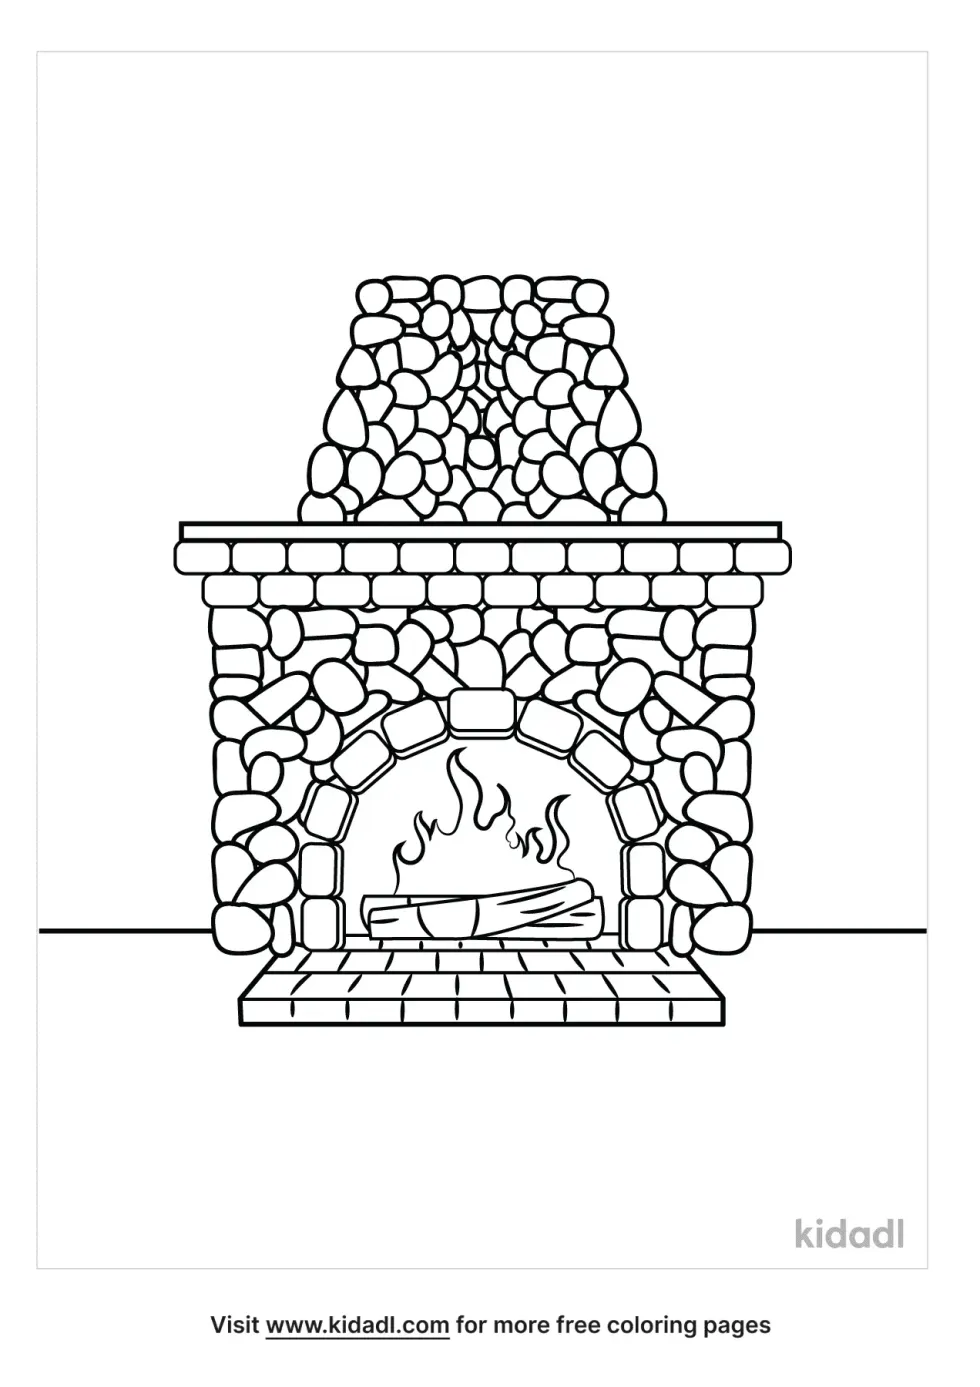 Cobblestone Fireplace Coloring Page